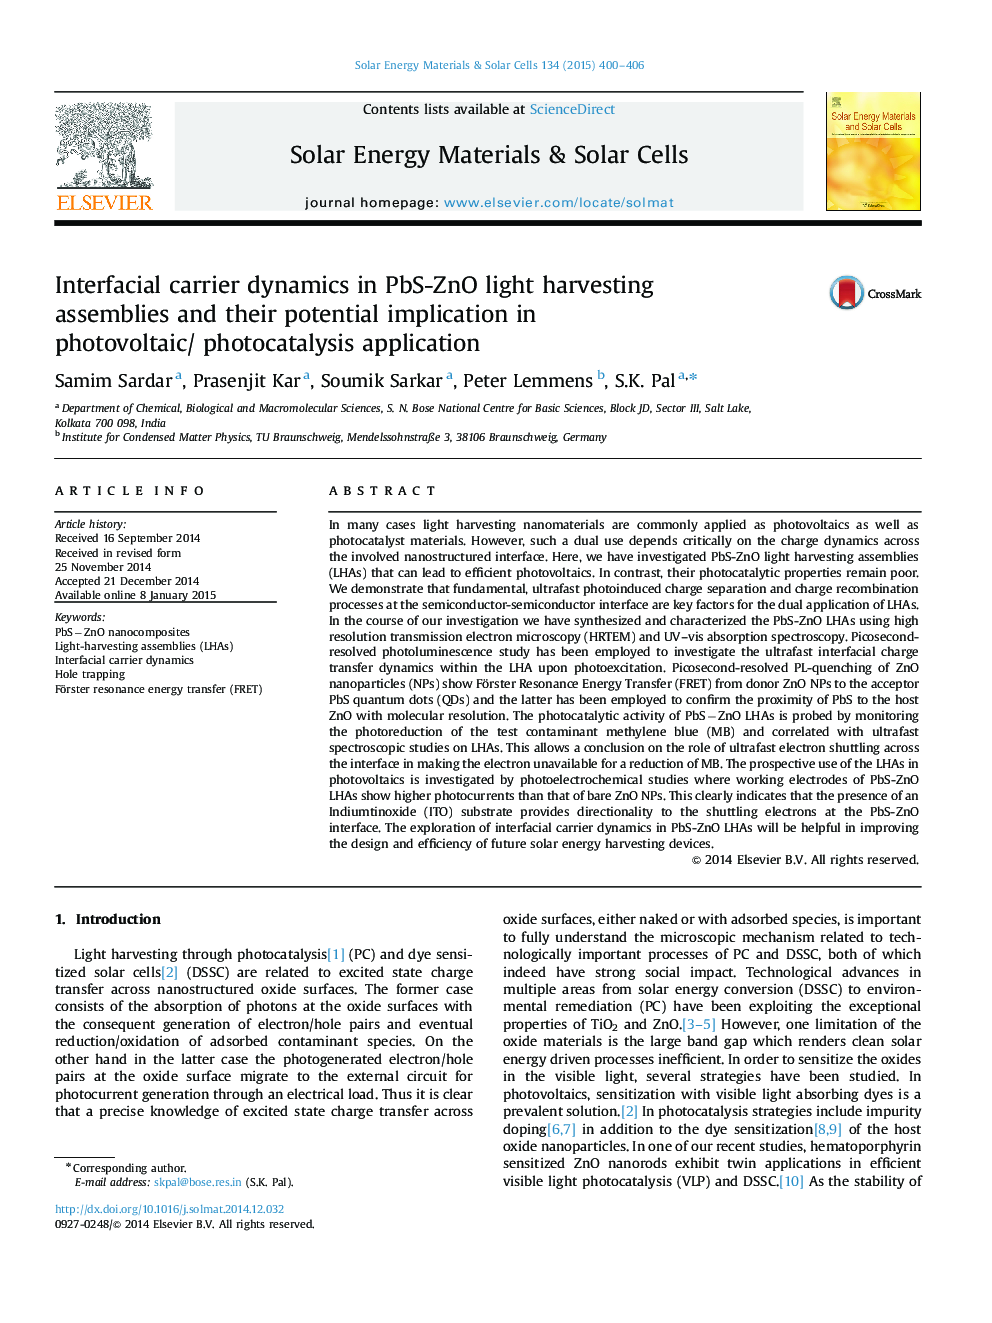 Interfacial carrier dynamics in PbS-ZnO light harvesting assemblies and their potential implication in photovoltaic/ photocatalysis application